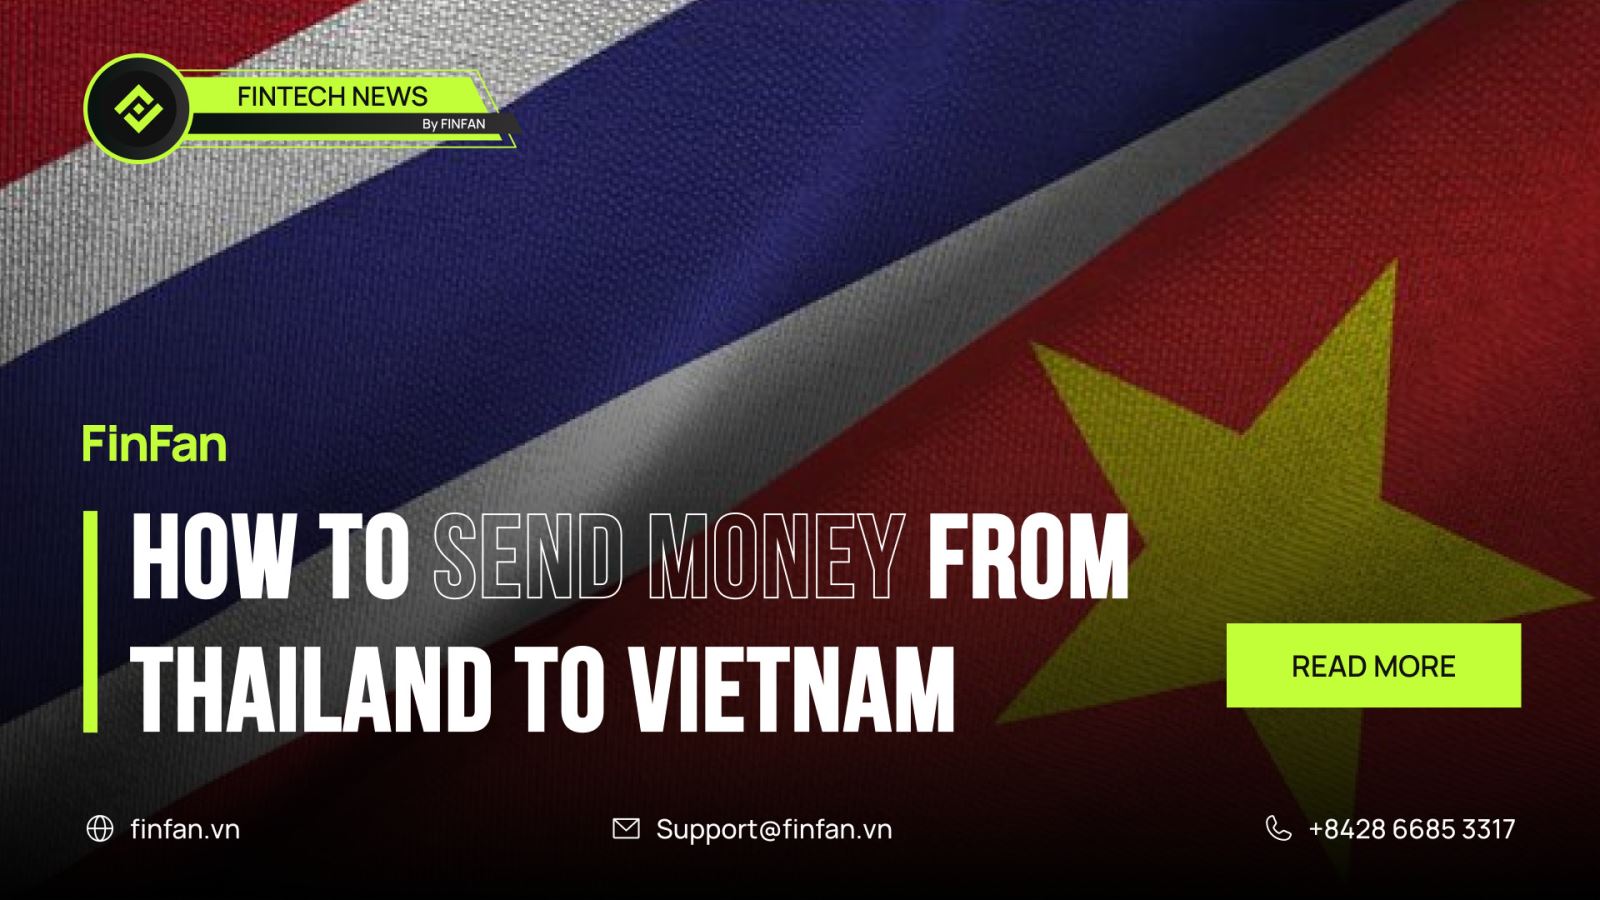 How to send money from Thailand to Vietnam?